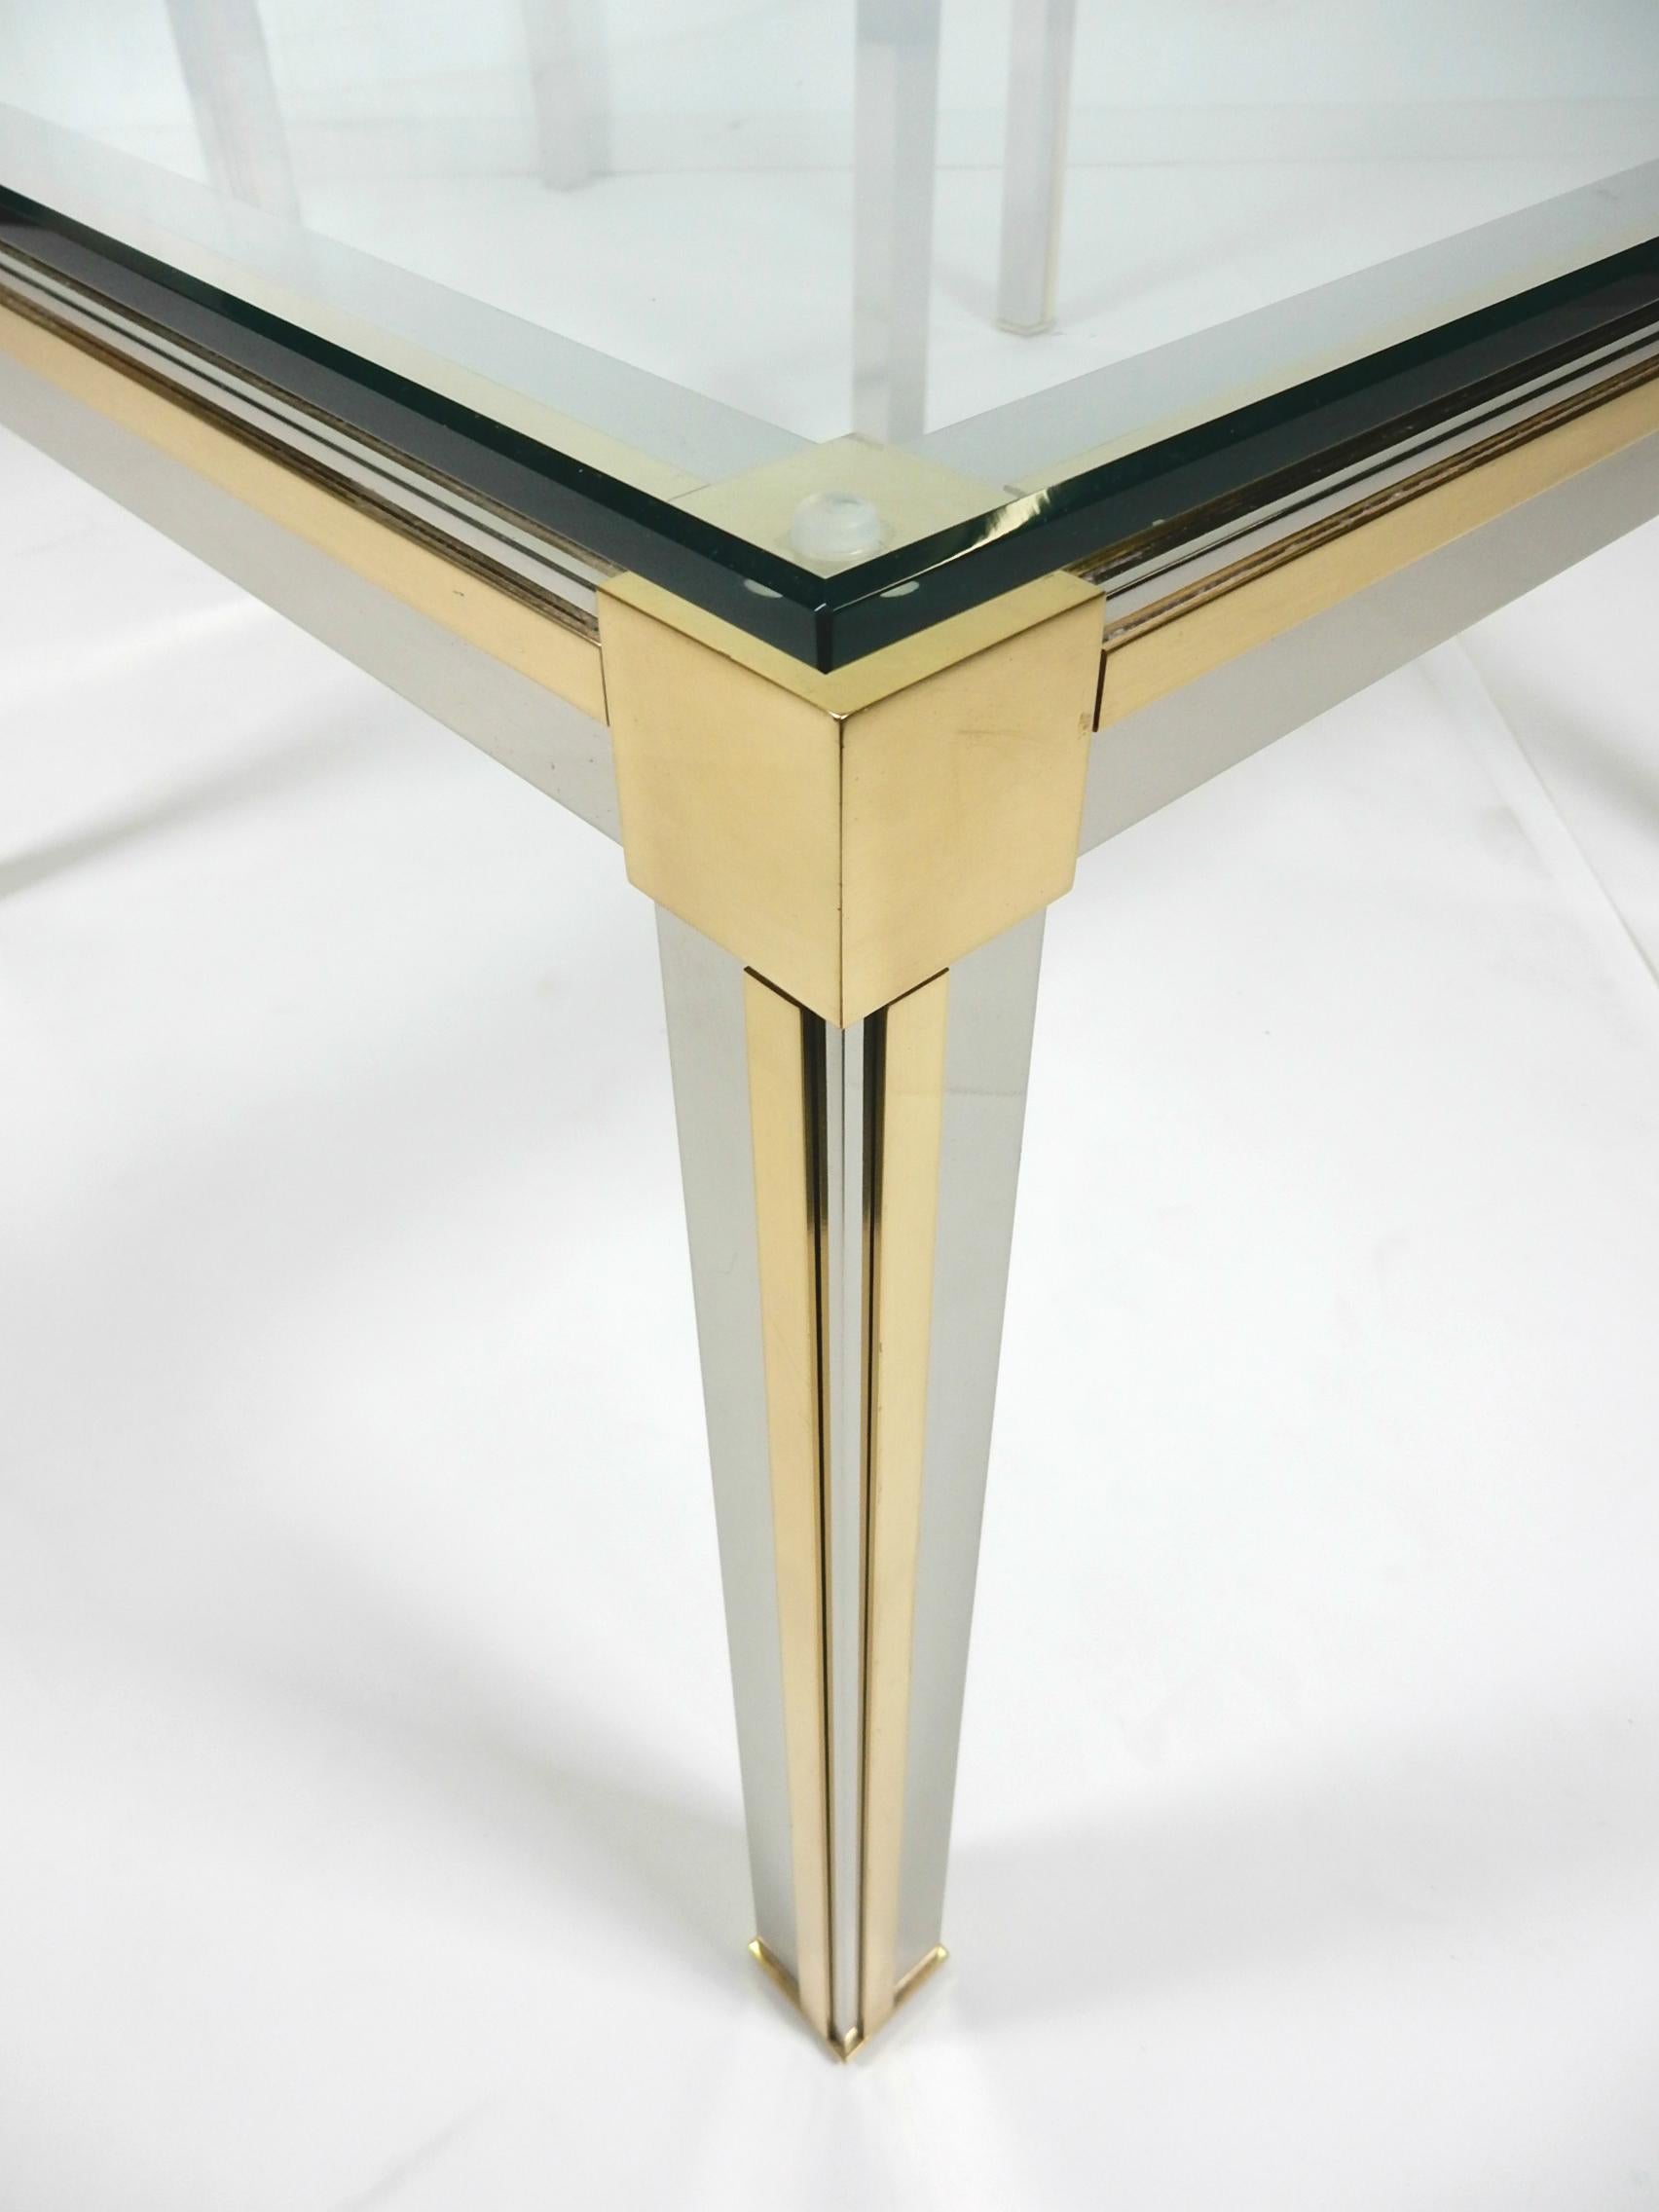 Pair of large chrome, brass and glass side tables attributed to designer Willy Rizzo.
Heavy well crafted quality tables with thick glass tops.
Clean, sharp edge design. Could be used together as a large cocktail table.